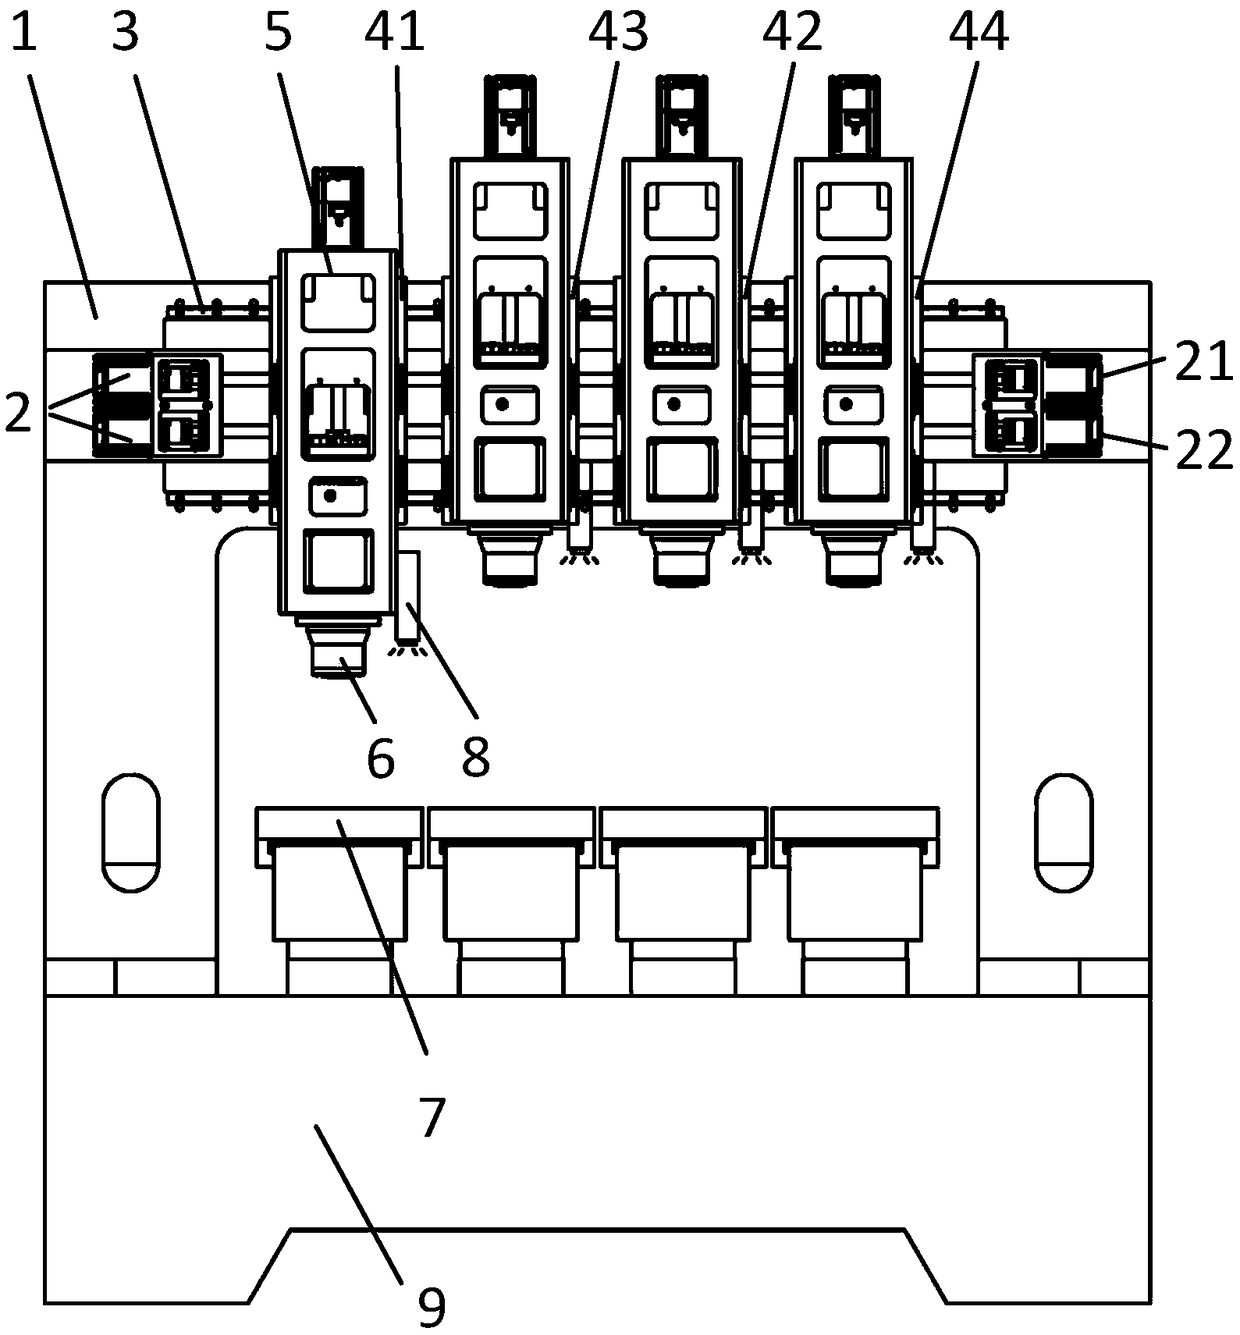 Parallel multi-channel numerical control machine tool